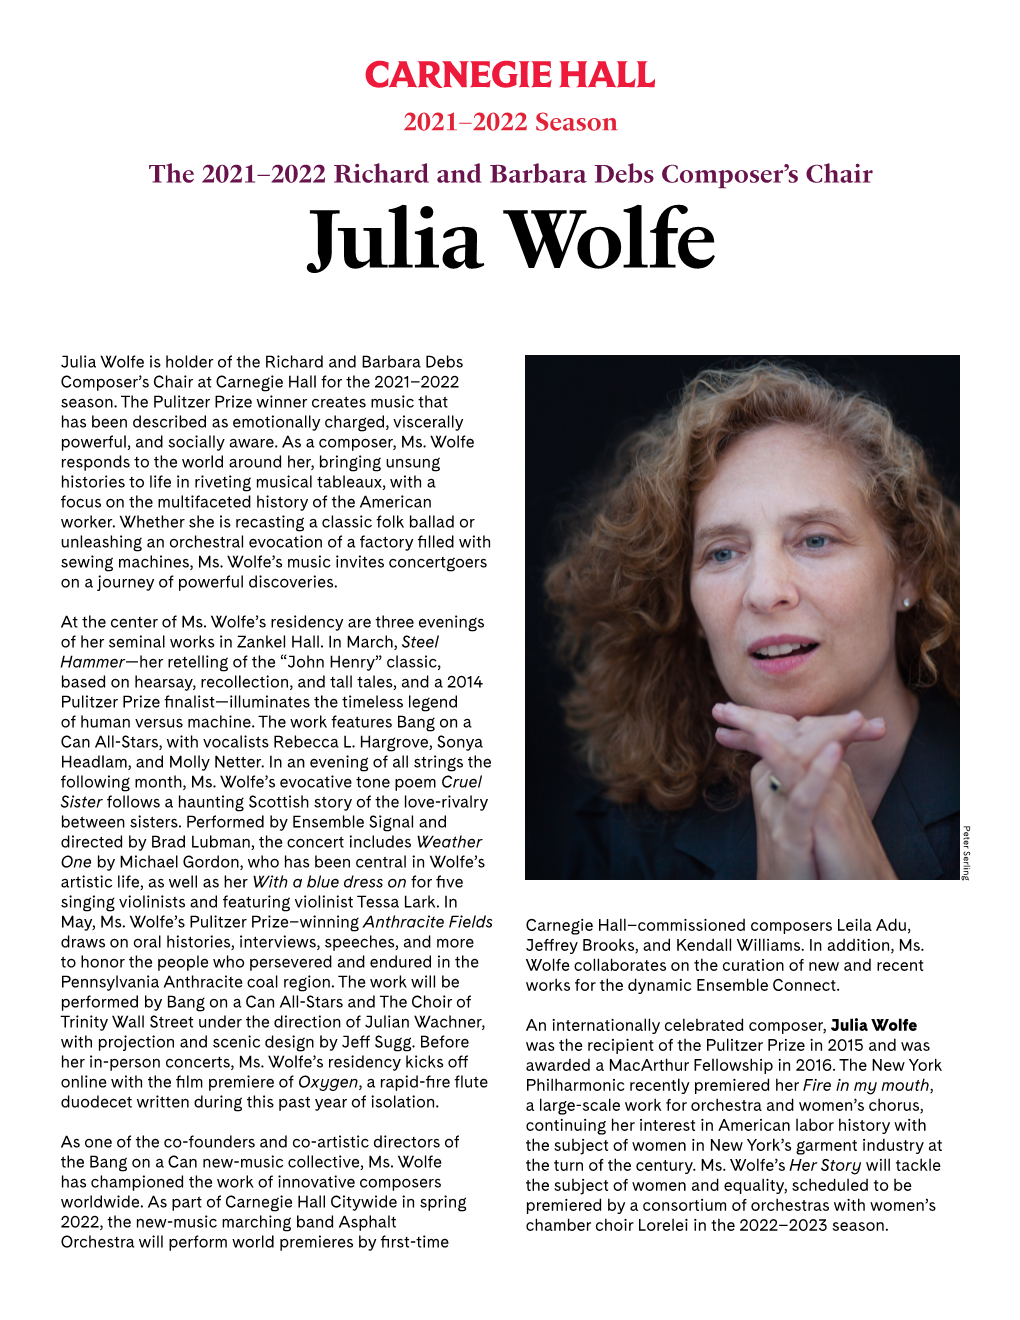 2021–2022 Debs Composer's Chair: Julia Wolfe